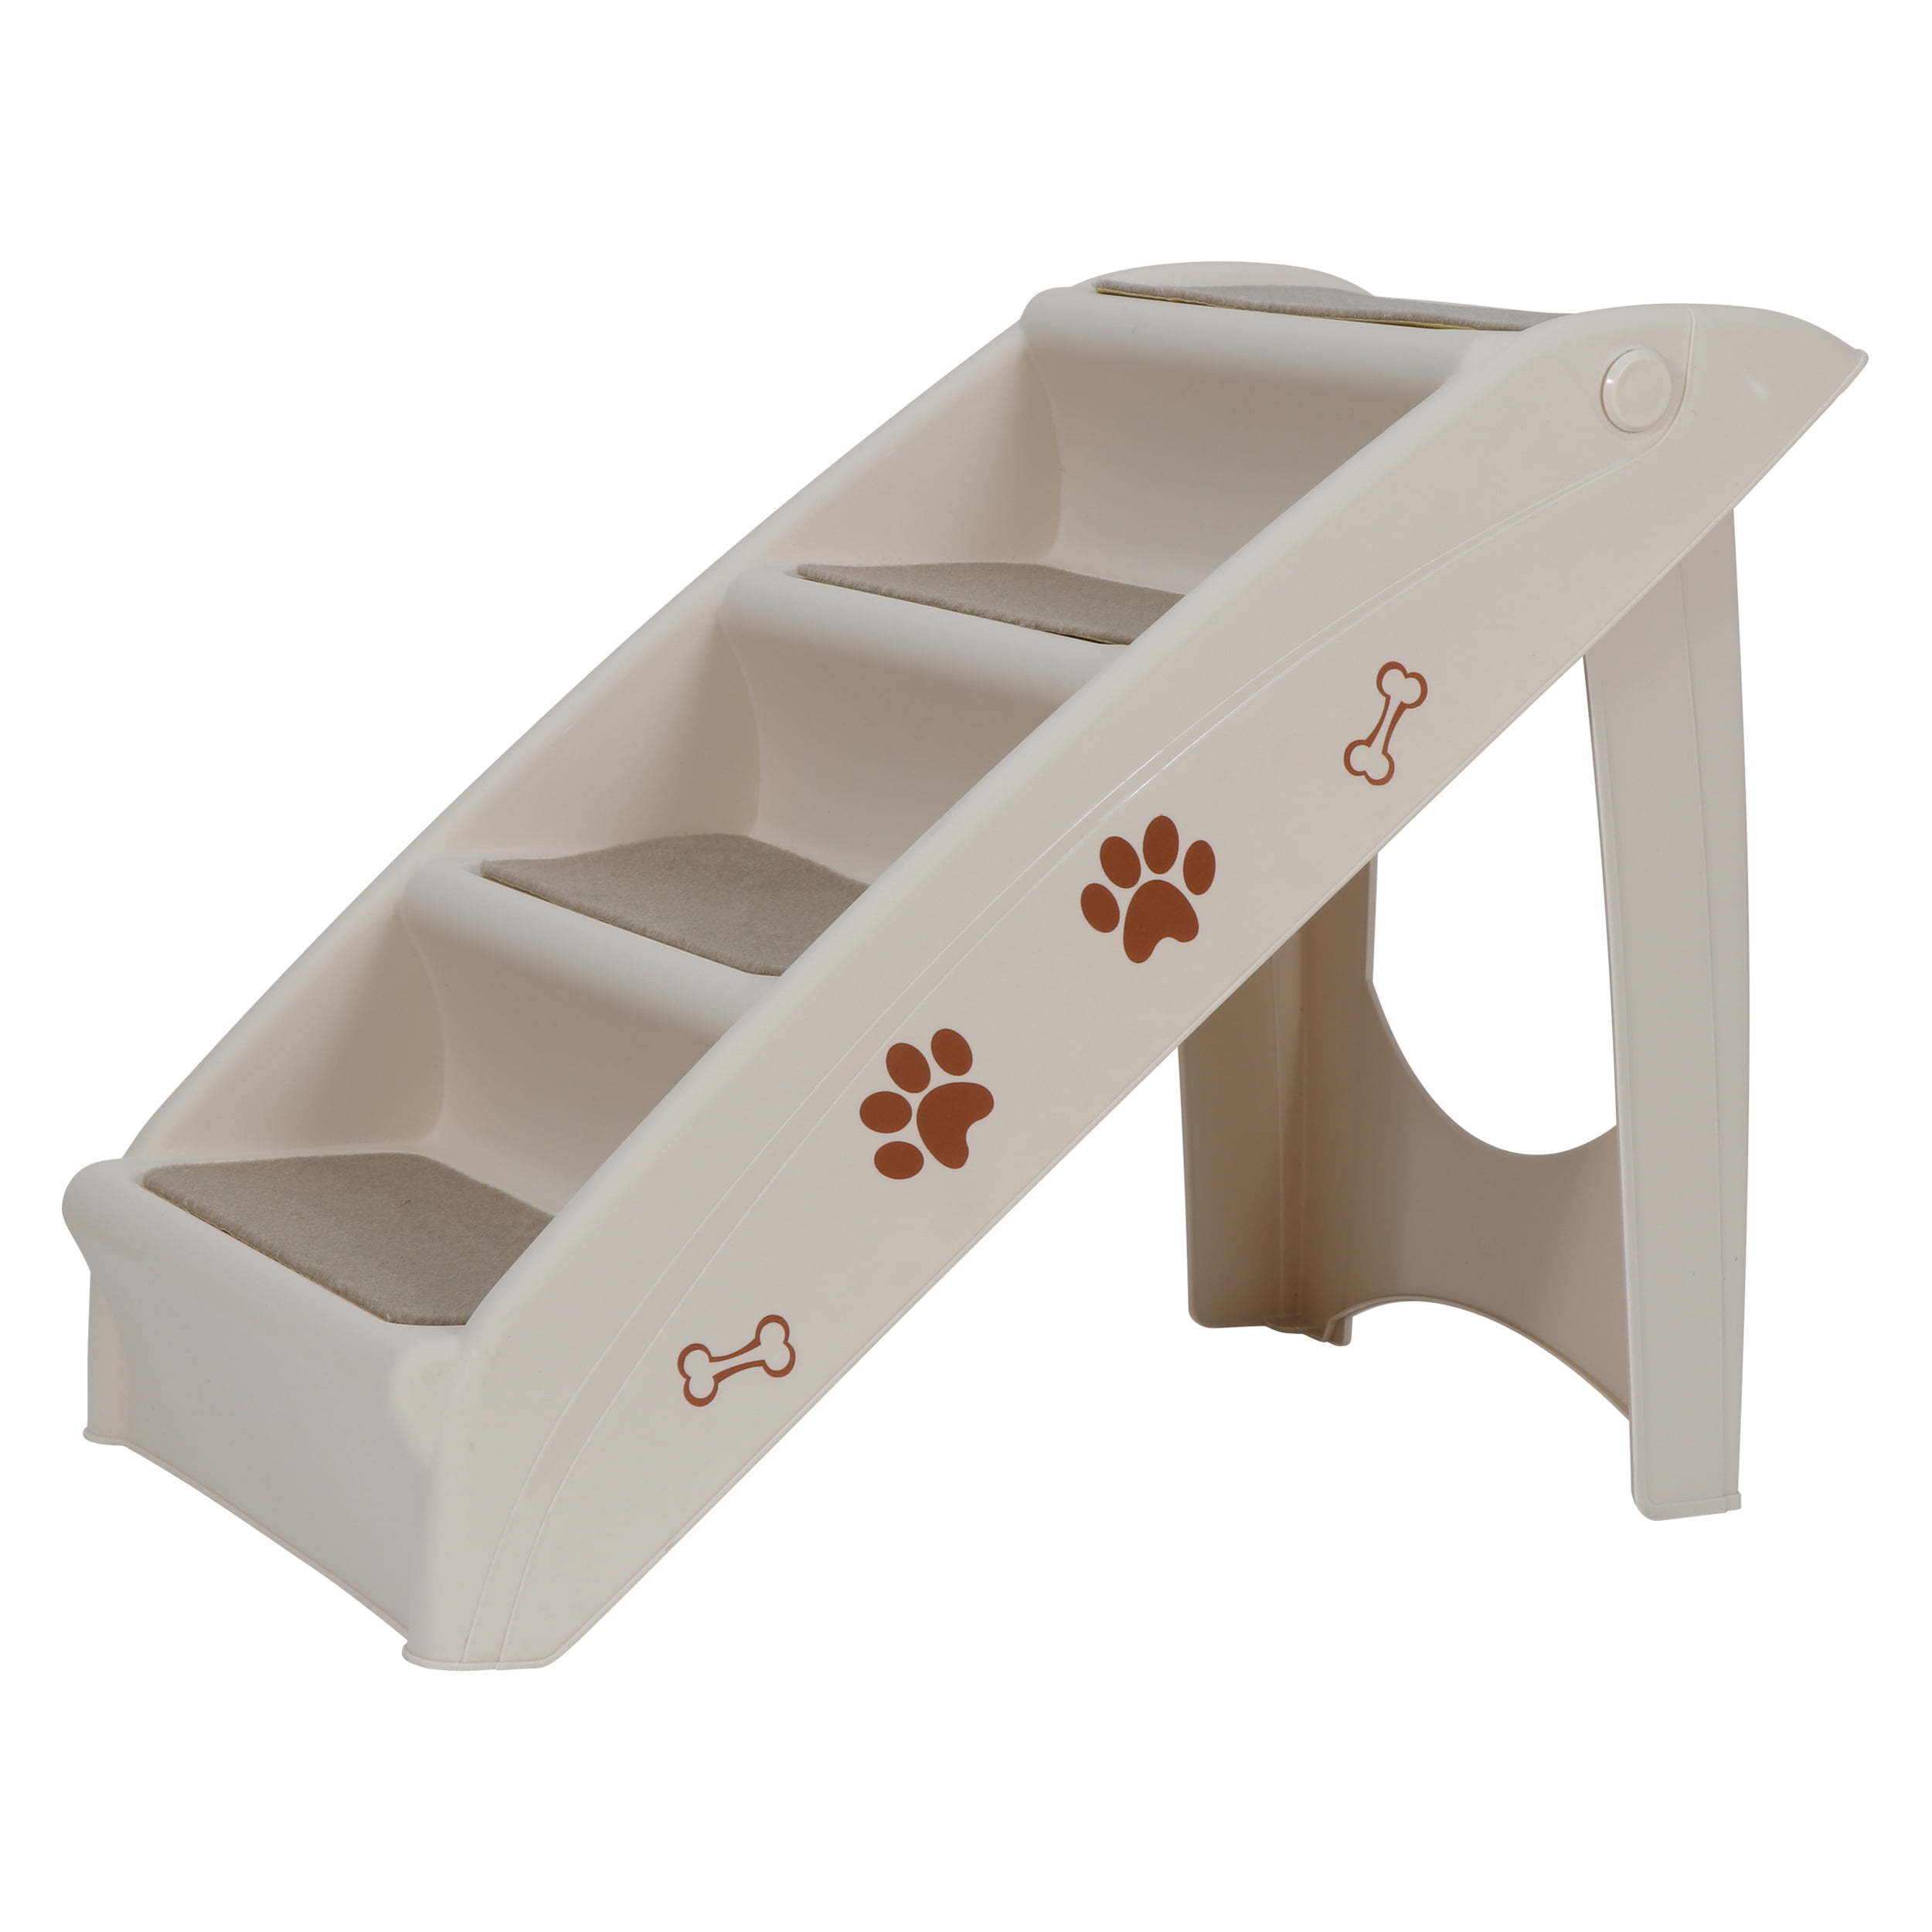 Pet Prime Foldable Dog Step Stairs Pet Foldable Lightweight Stairs 4 Steps Pet Plastic Access Steps Stairs Dog Cat Foldable Essentials Steps